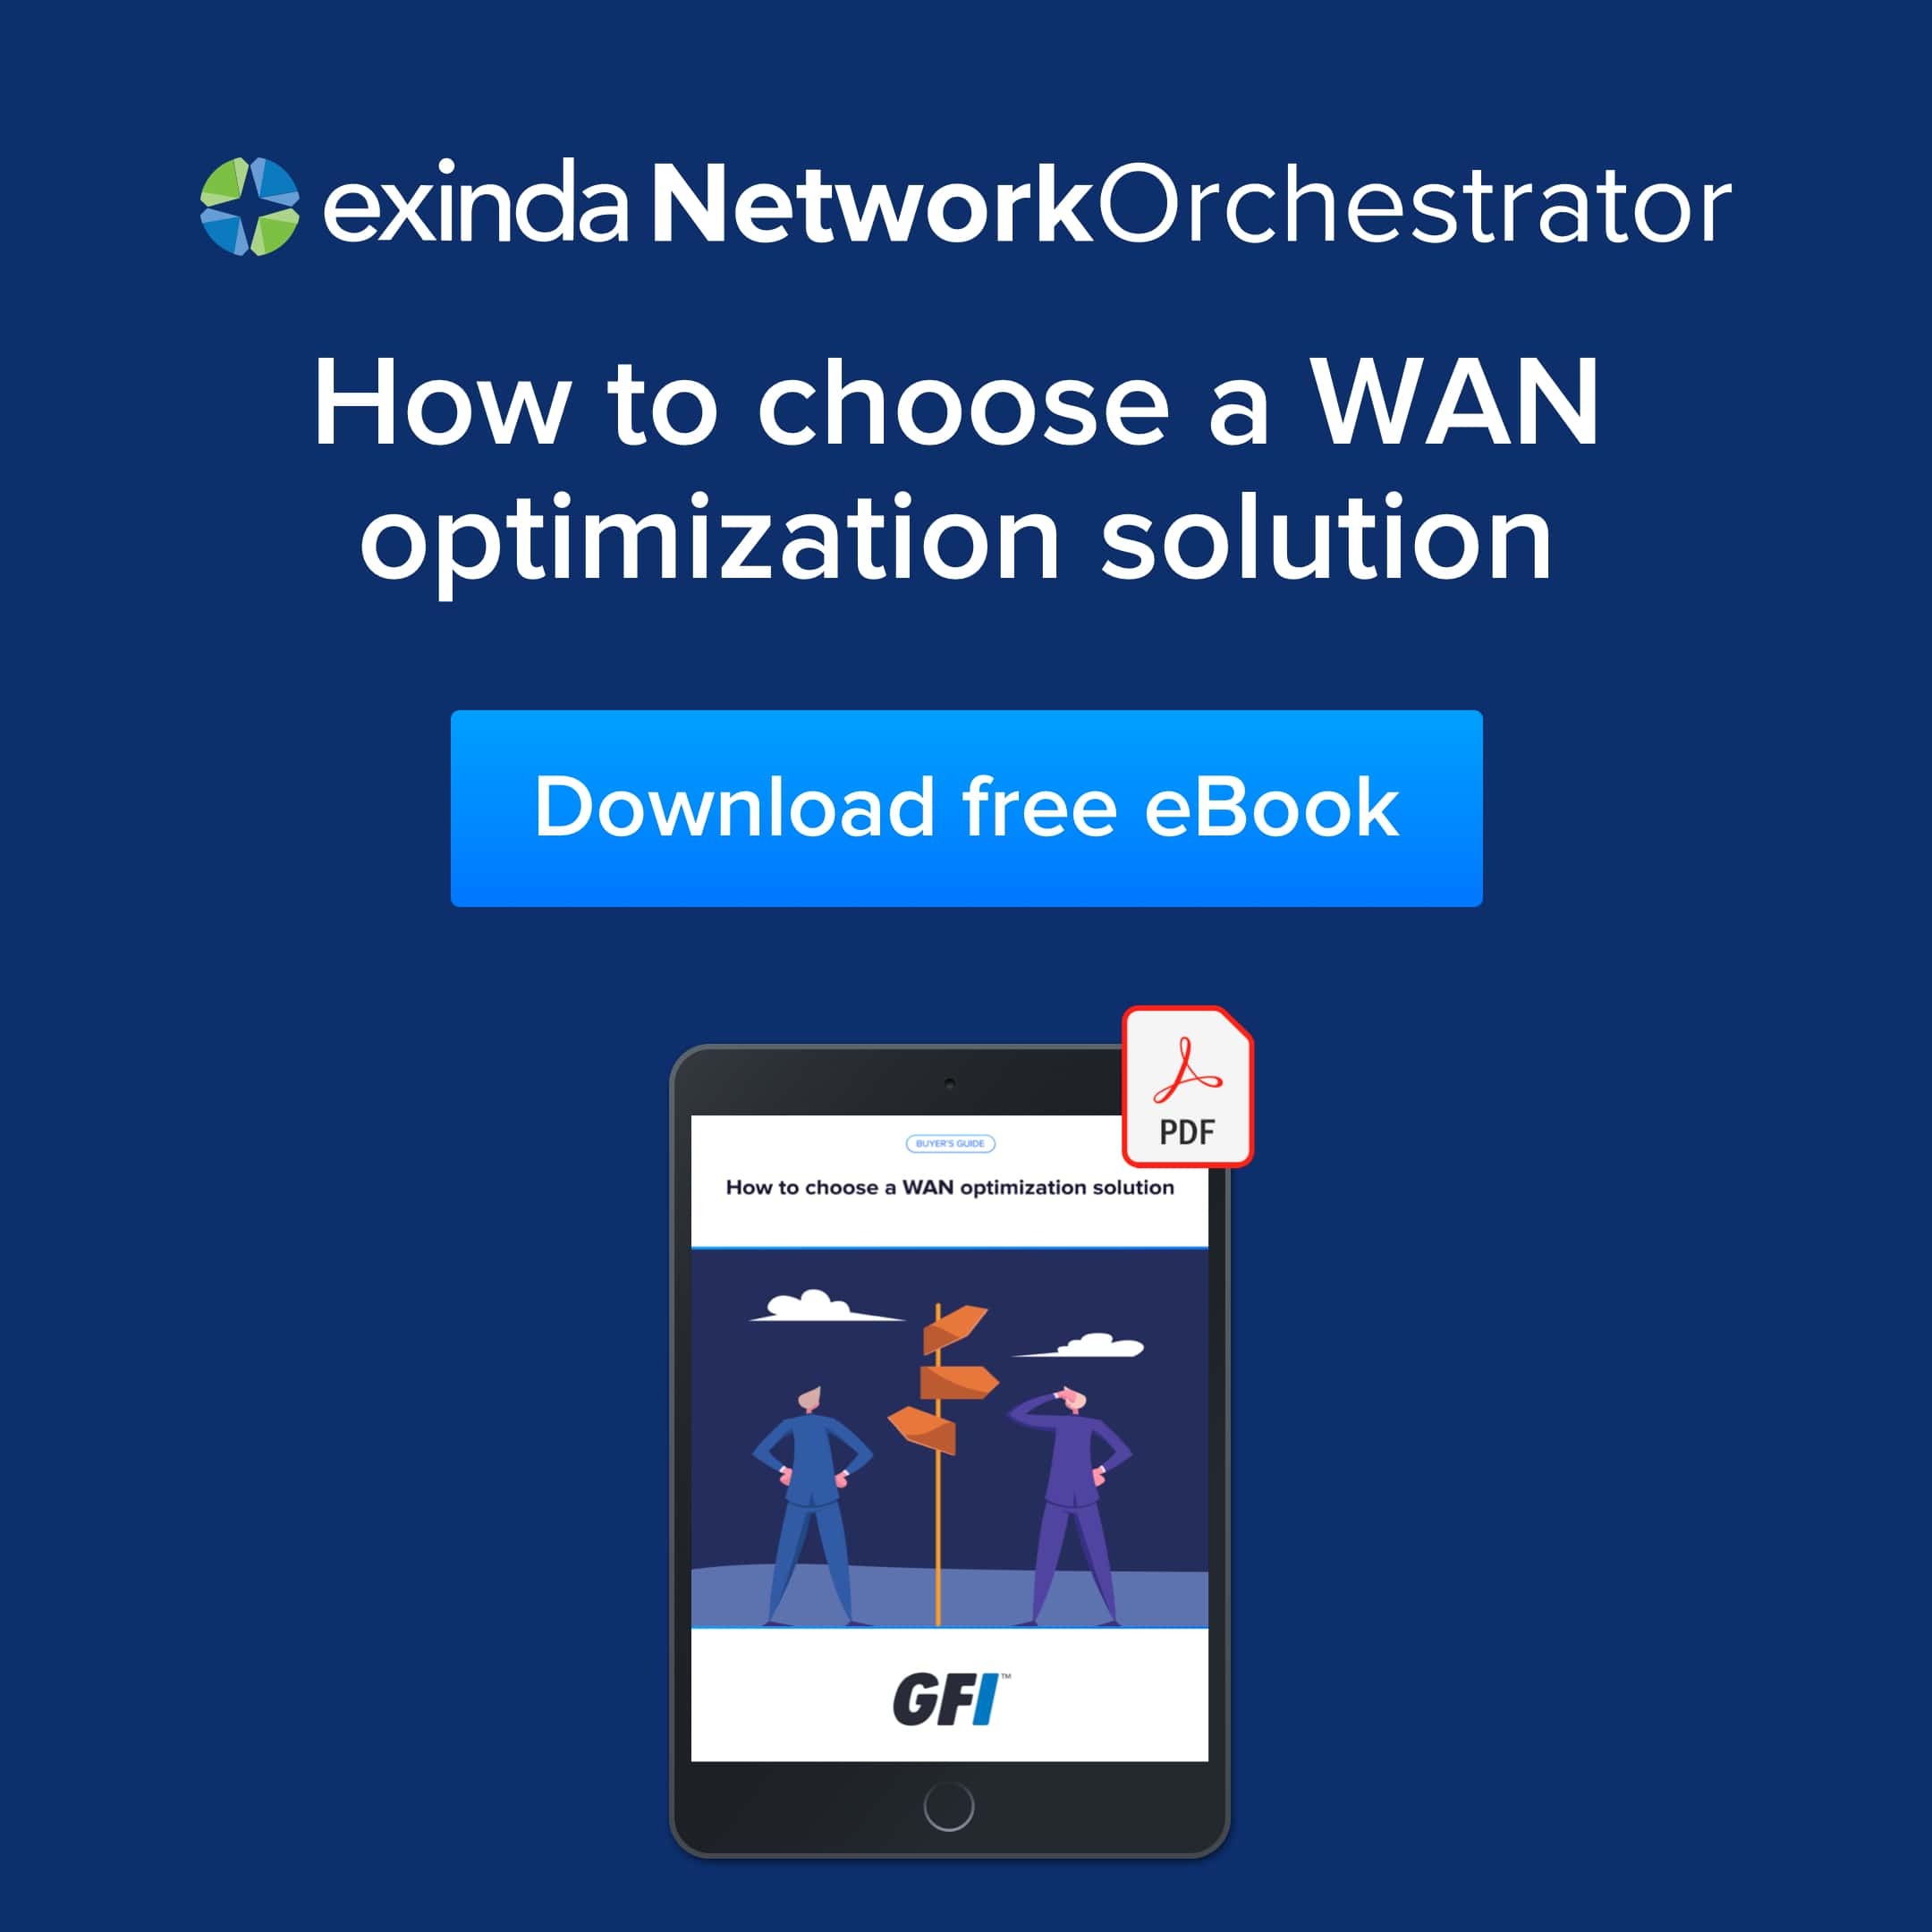 How to choose a WAN optimization solution